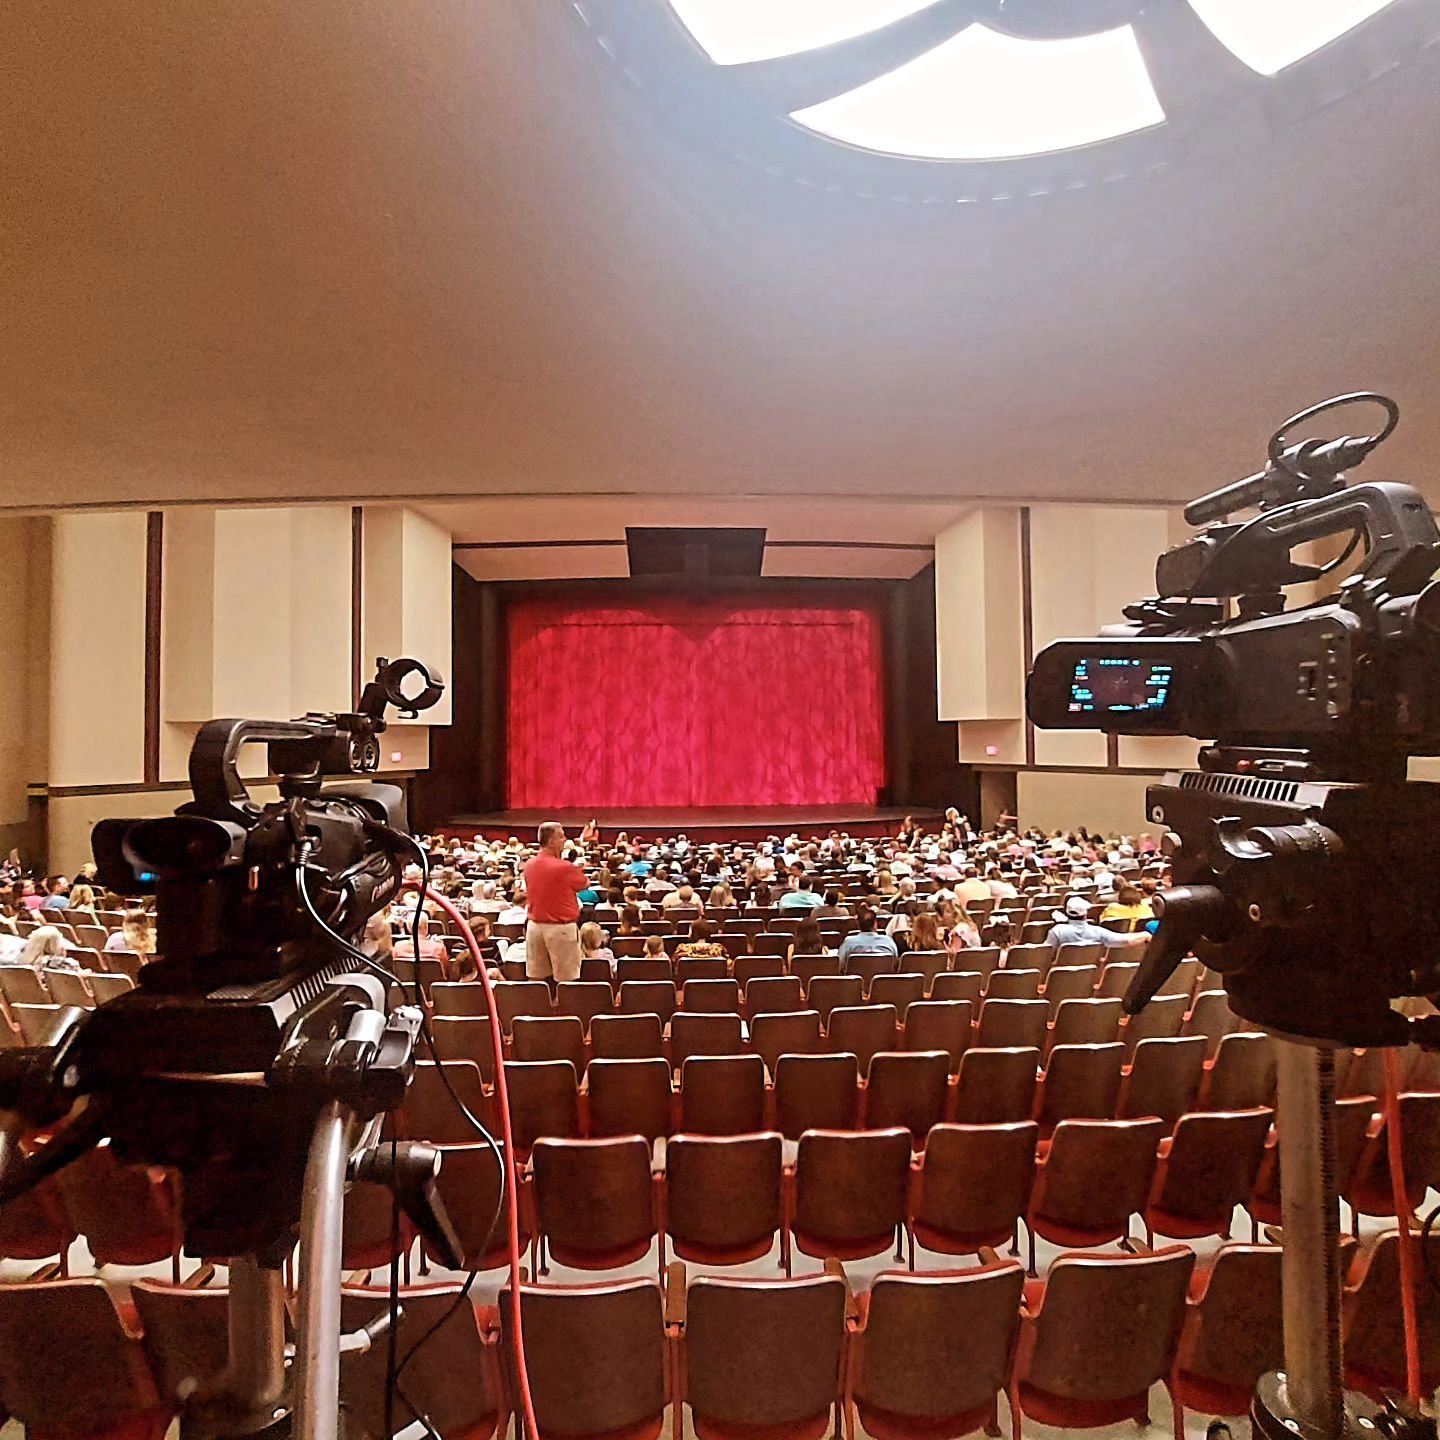 Always happy to record and provide production support for @dazzledancecenter and their annual dance recital! Break legs!
.
.
.
#videography #soundlightscamerayou #dancerecital #ddcllc #ddclife